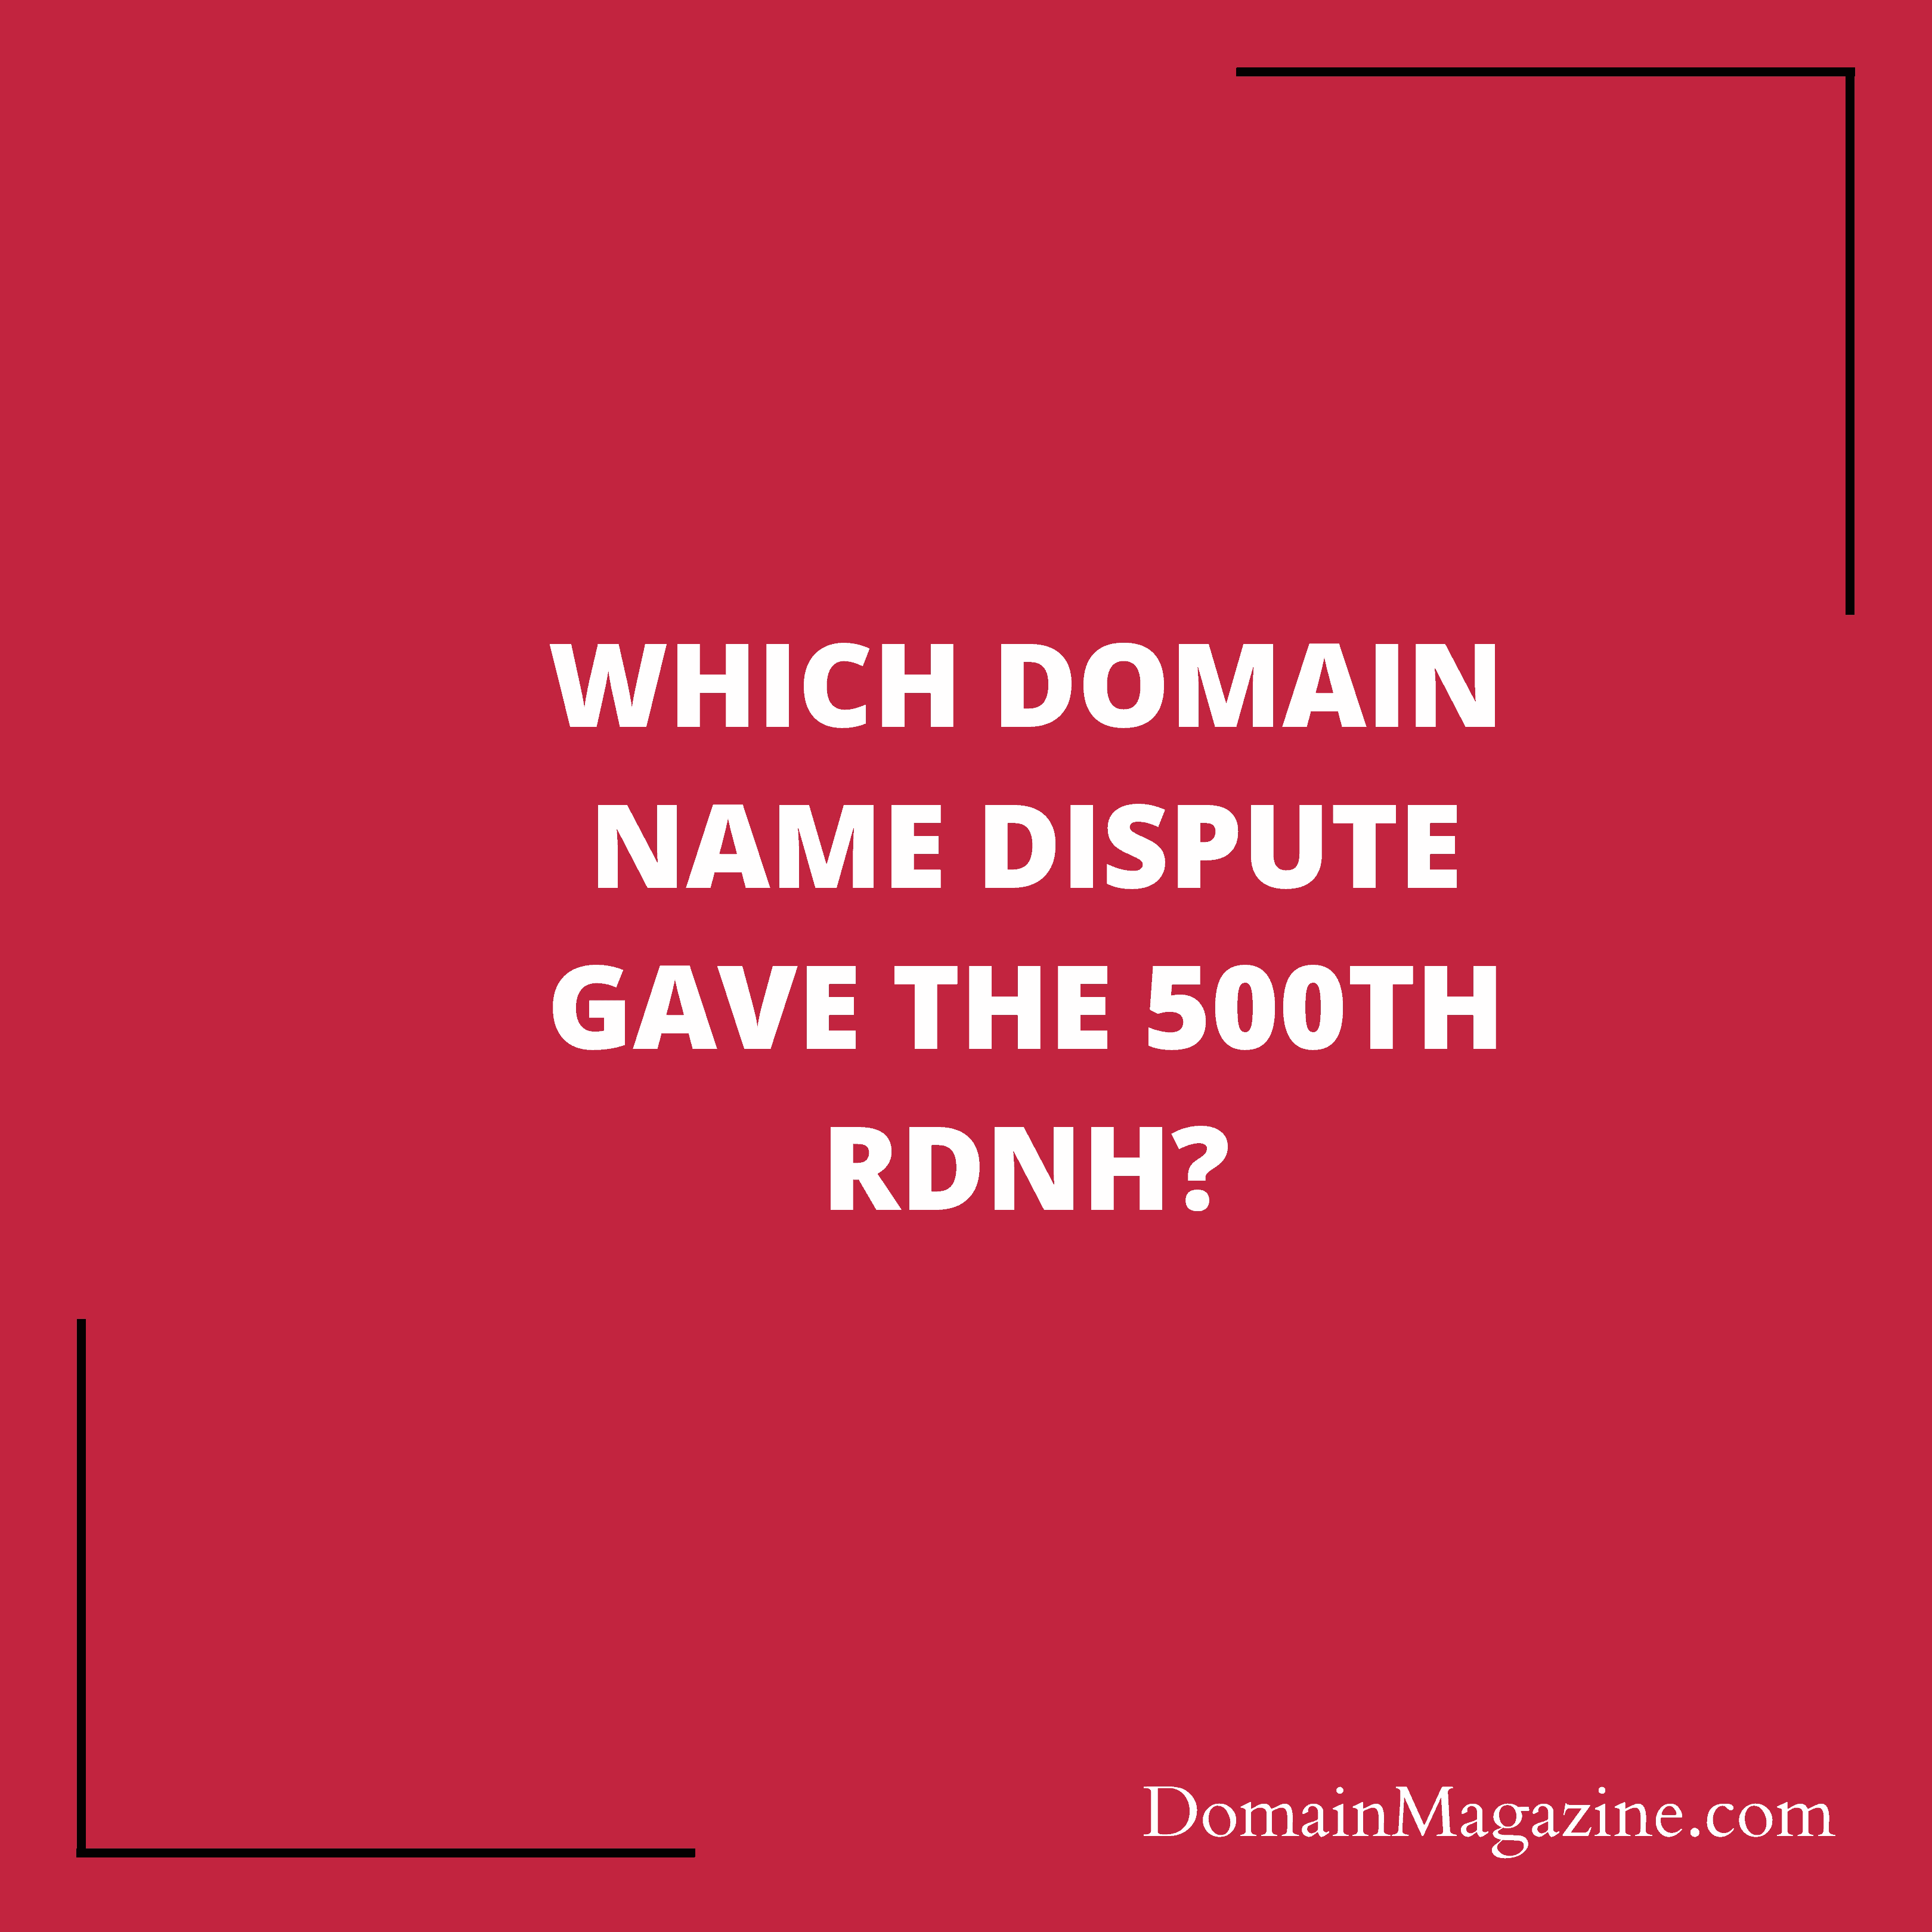 Which domain name dispute gave the 500th RDNH?